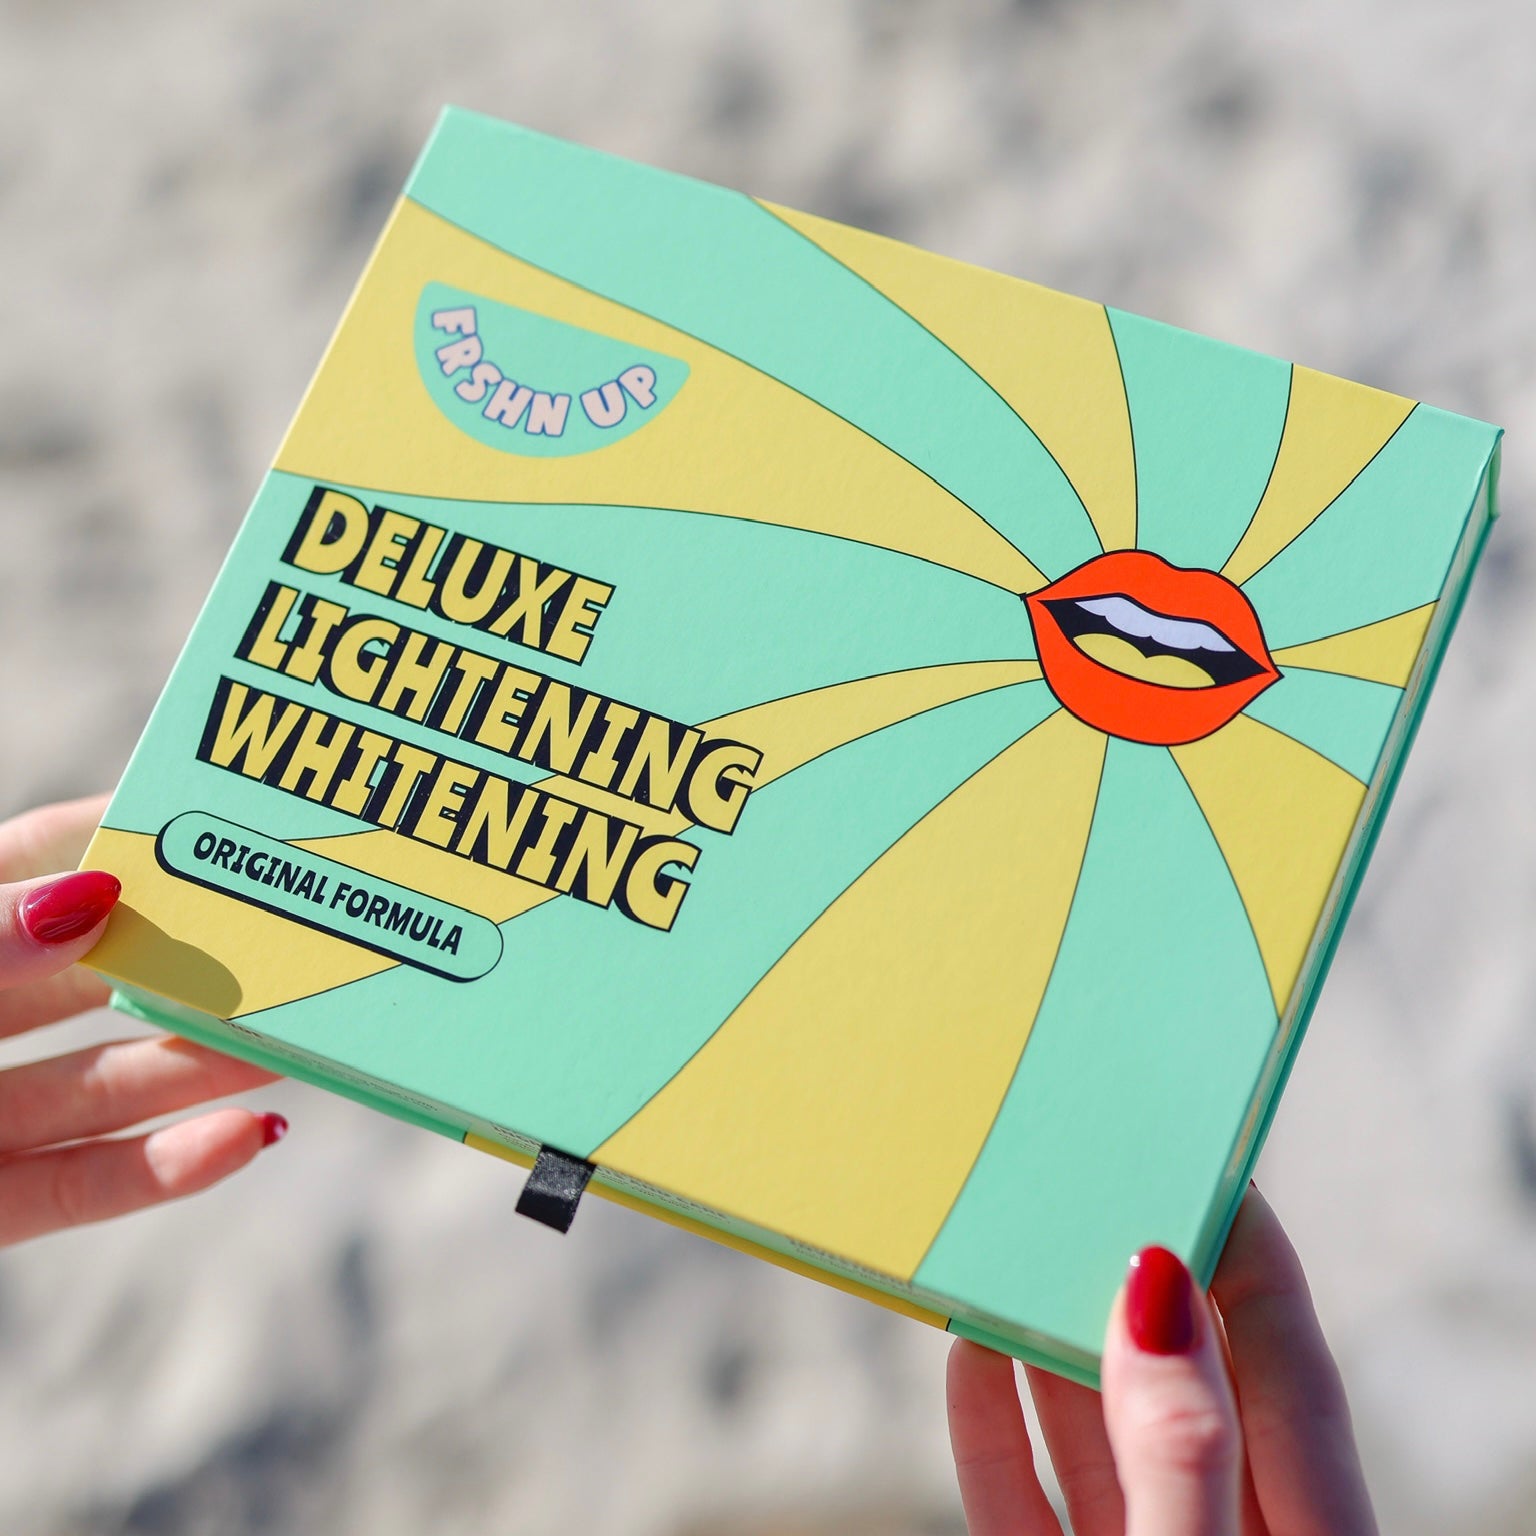 A person holding a box of FRSHN UP Ultimate Lightening Whitening Vault with a blue and yellow design, designed to give you a radiant smile.